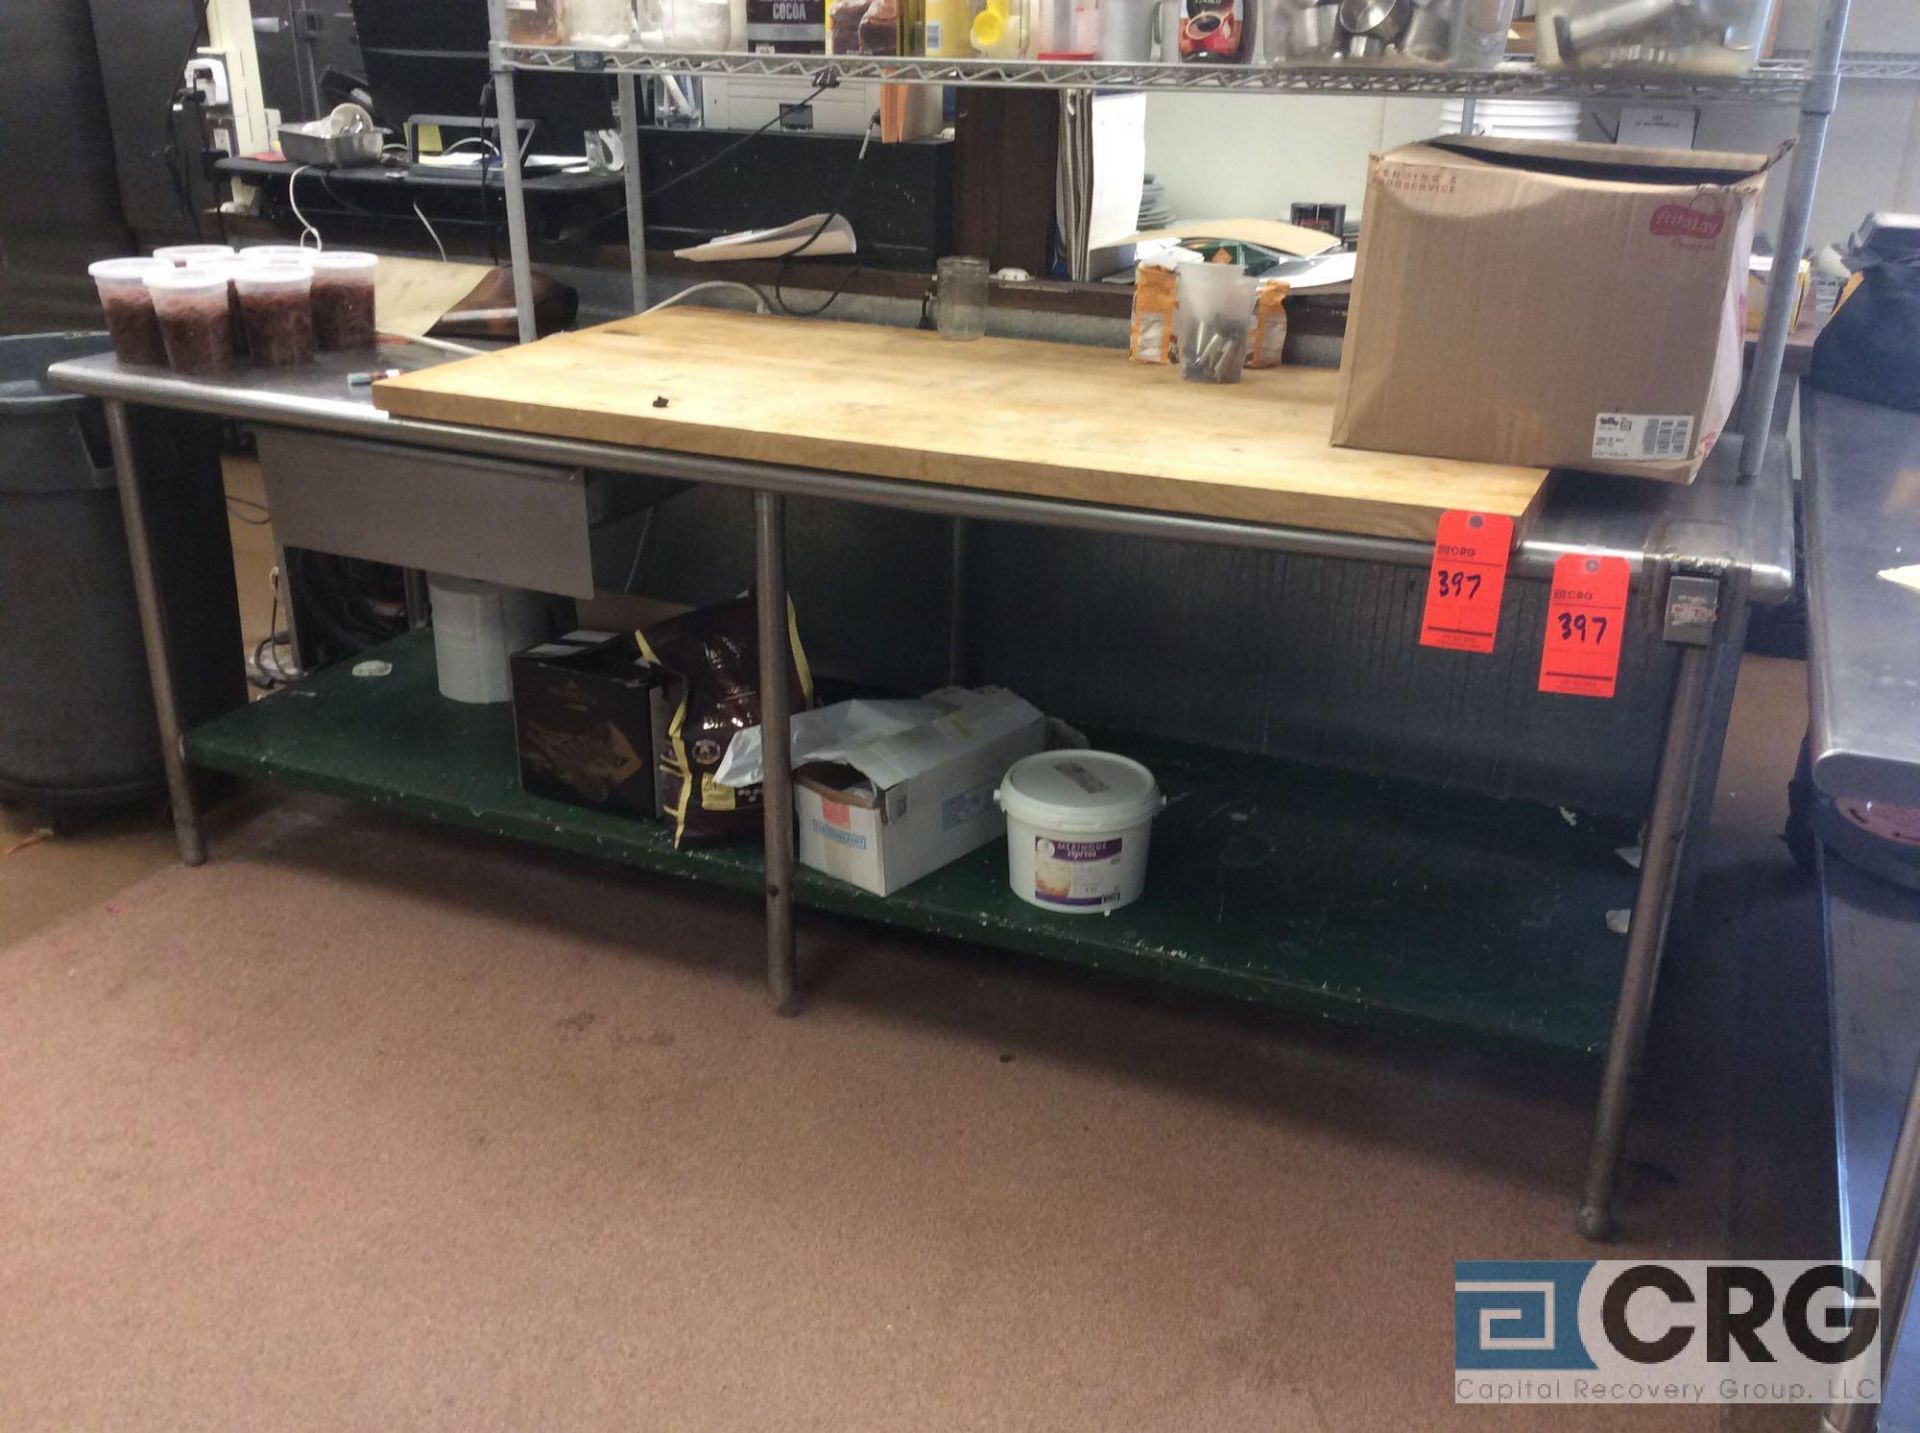 8 foot stainless steel work table with 5 foot butcher block top (no contents)